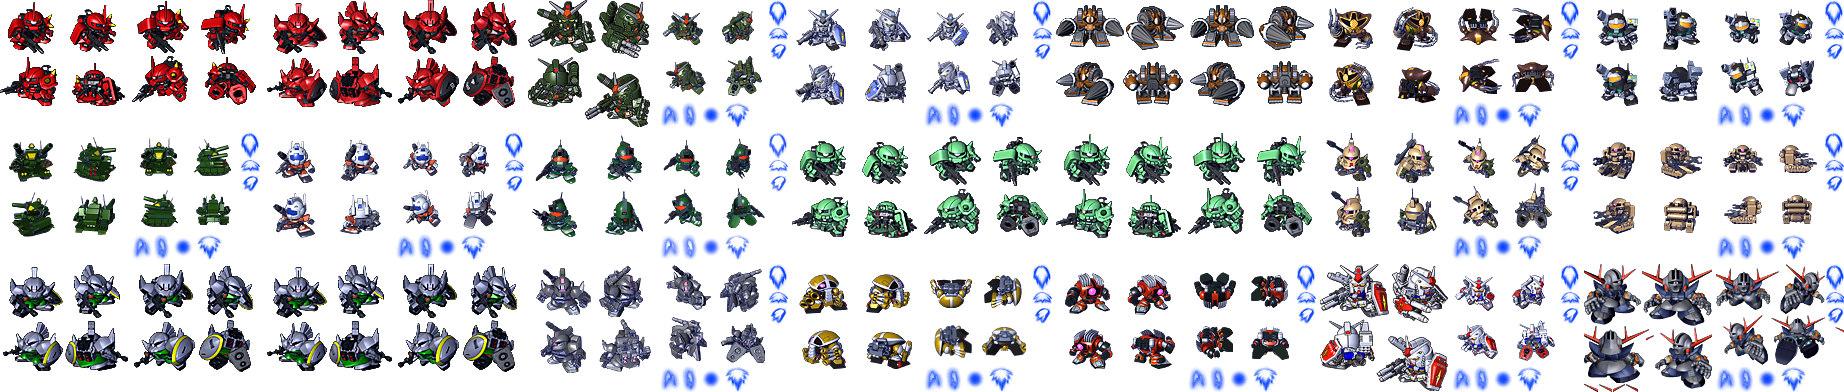 Mobile Suit Variations